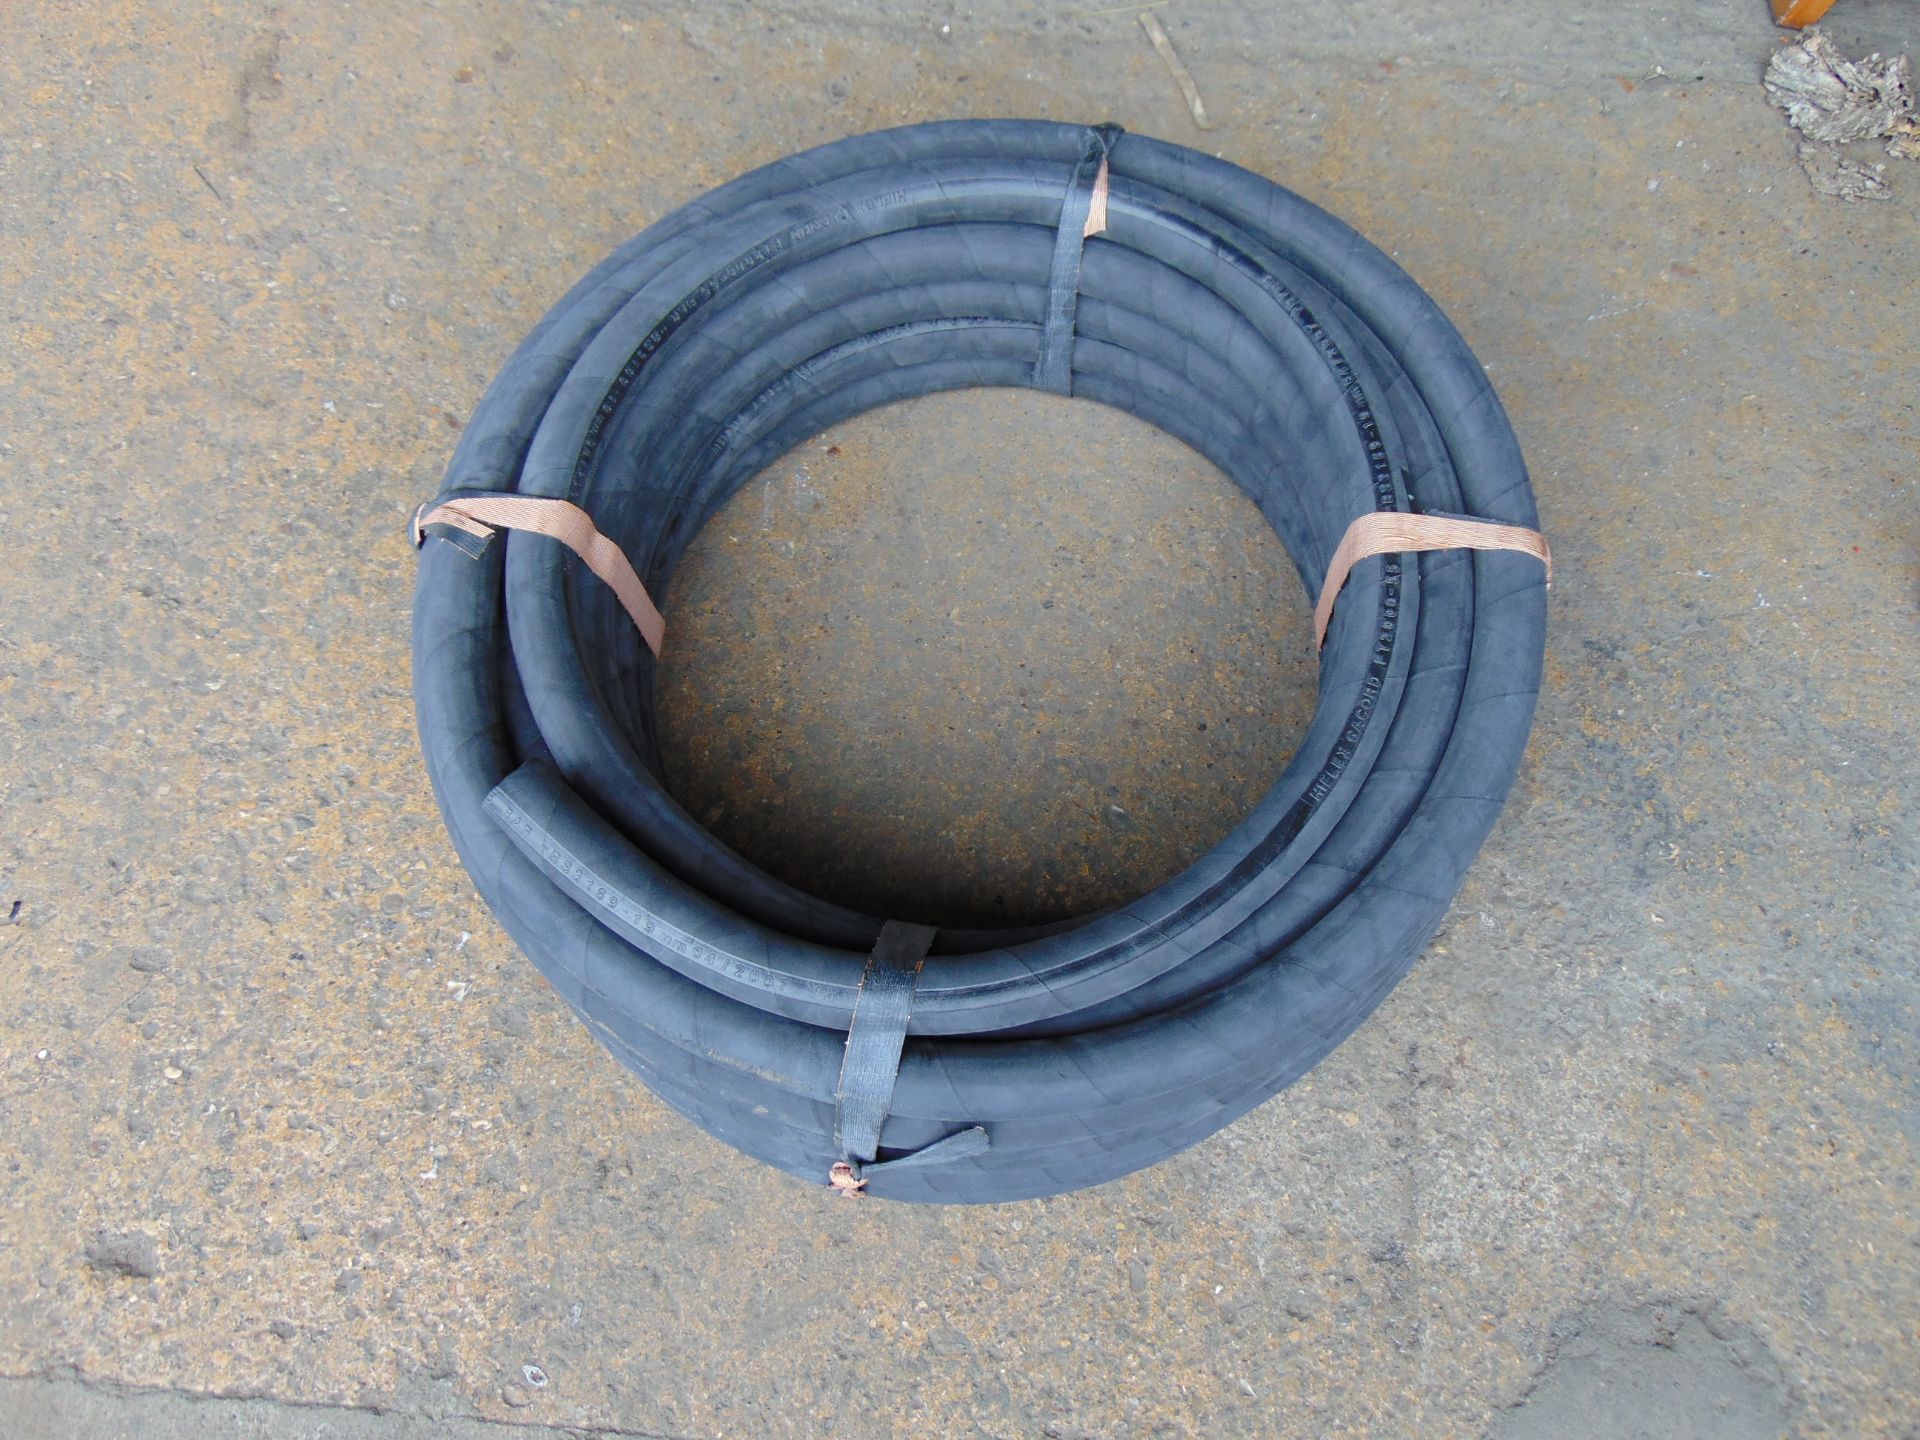 New 20m Roll of 19mm Low Pressure Double Braid Hose - Image 5 of 5